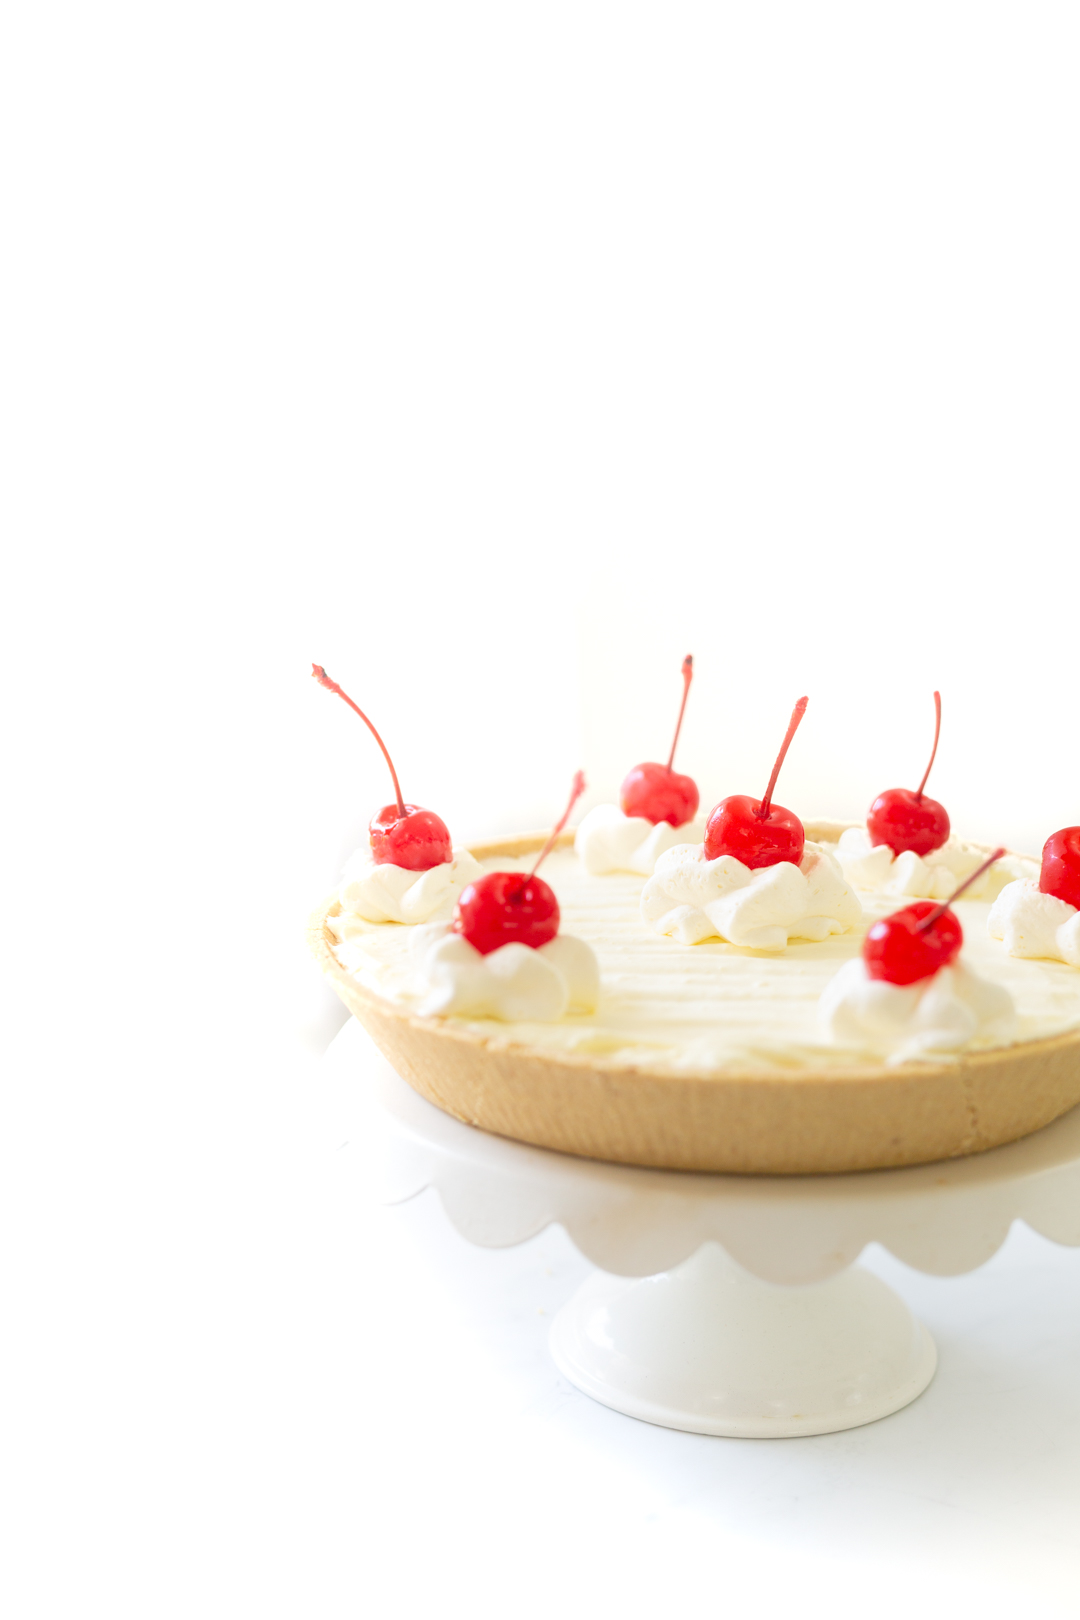 pretty pineapple pie with large cherries with stems on top to decorate